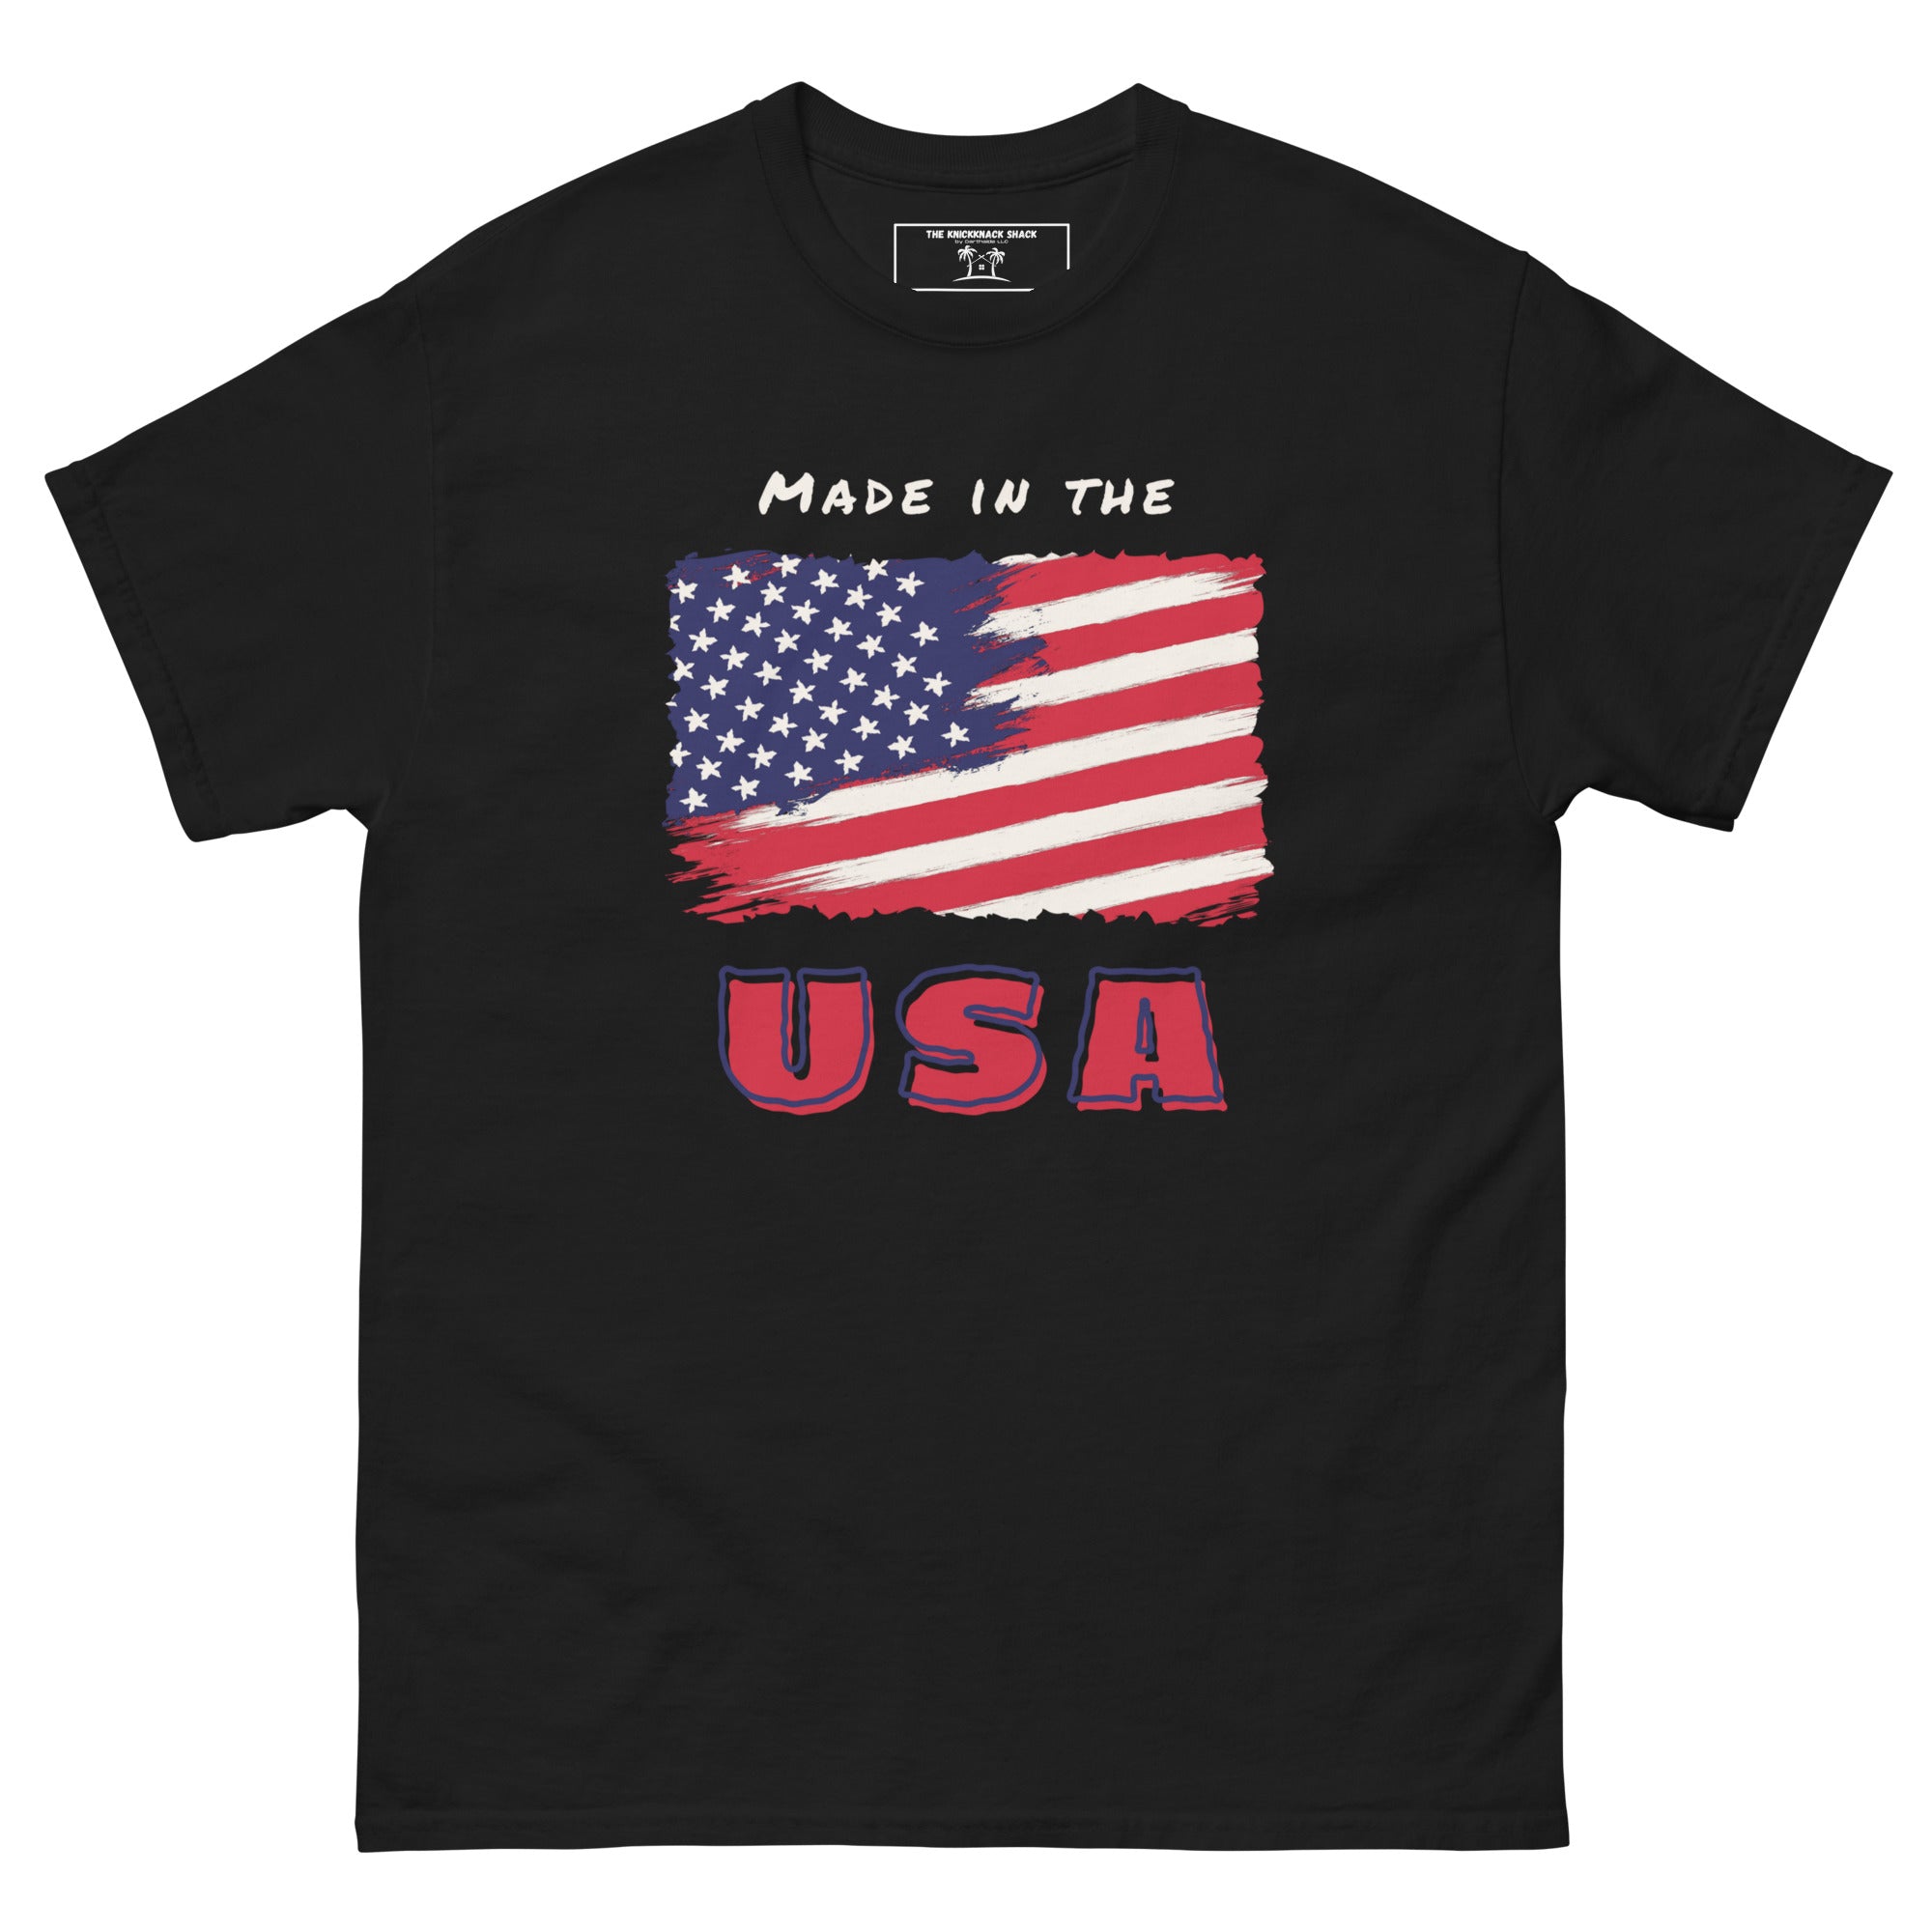 Classic Tee - Made in the USA (Dark Colors)